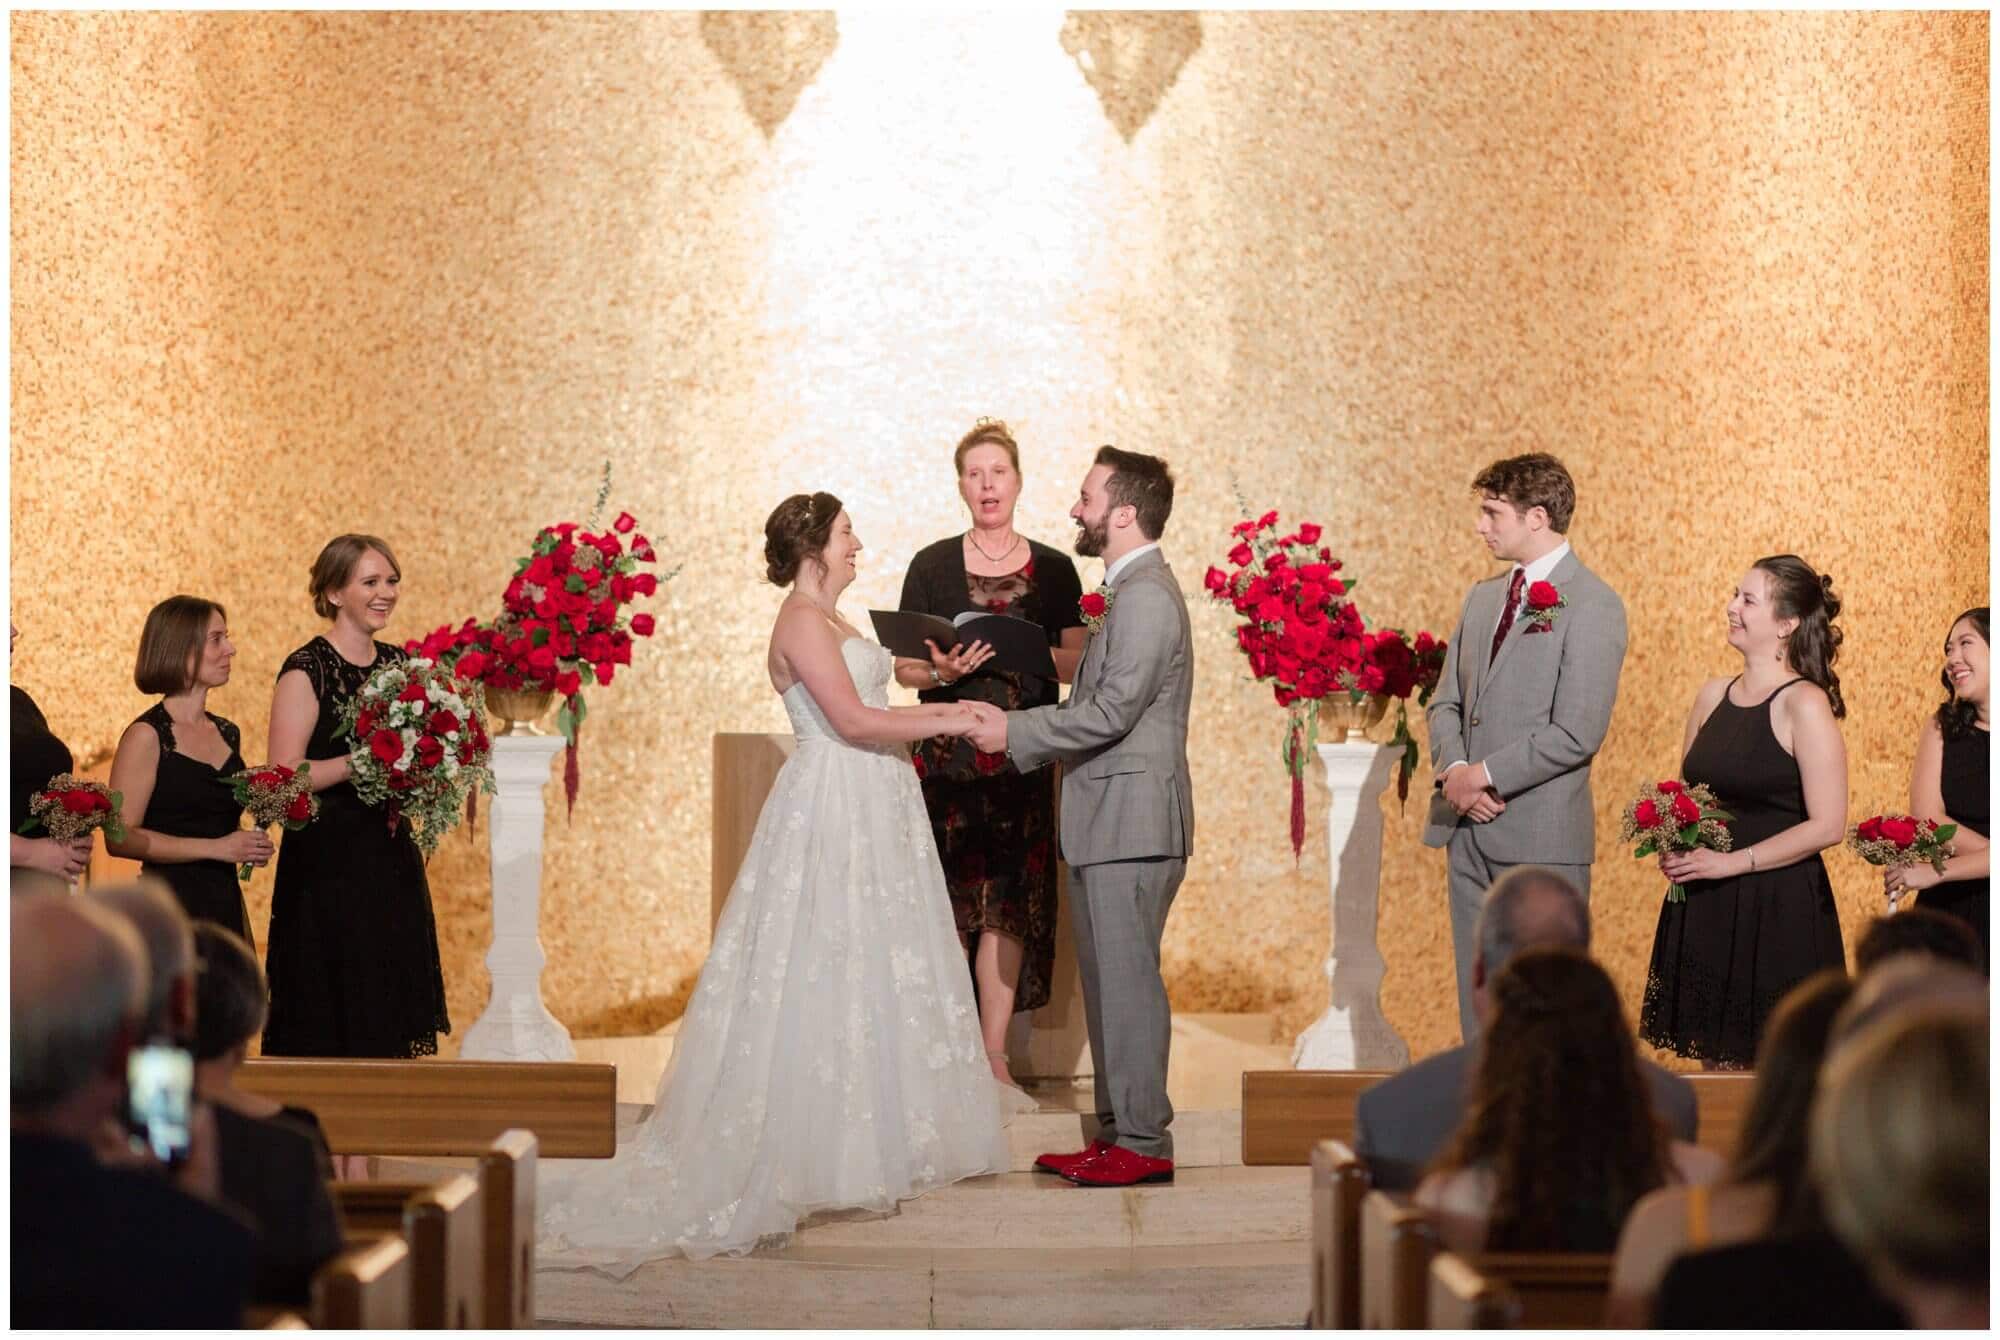 wedding ceremony at Rice University in Houston Texas by Swish and Click Photography